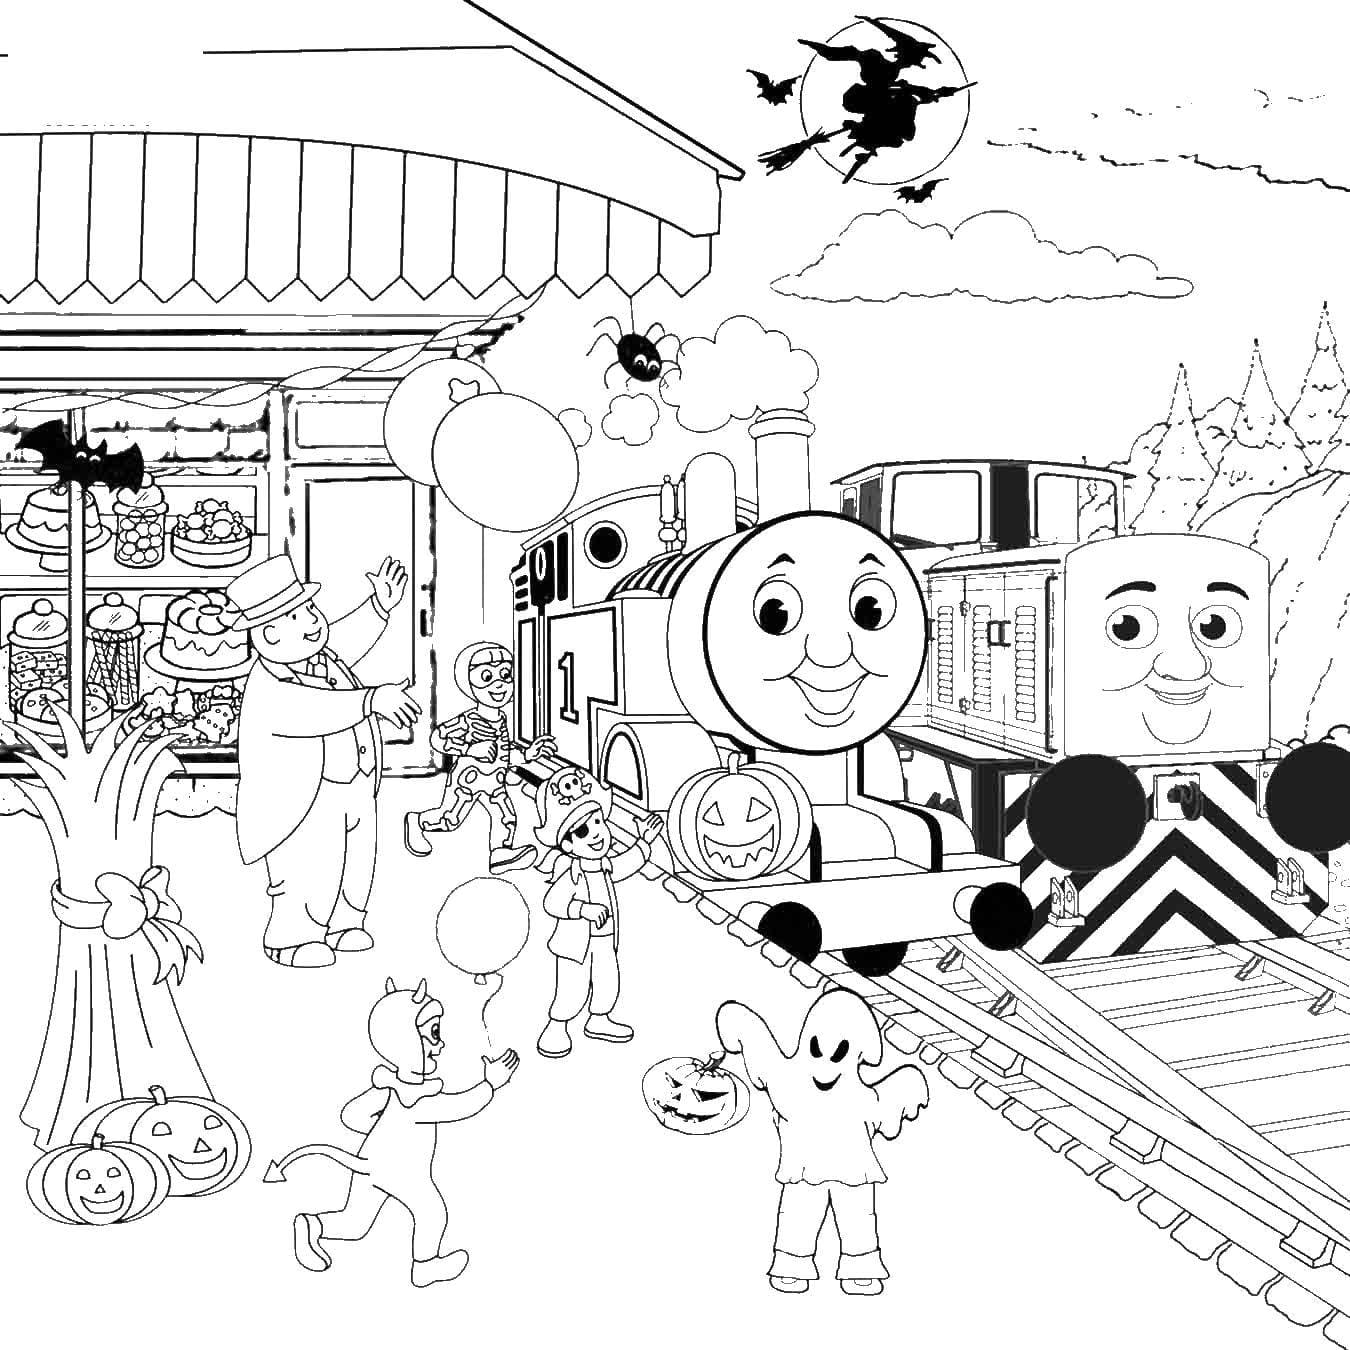 Thomas and Friends Coloring Pages | 75 images Free Printable